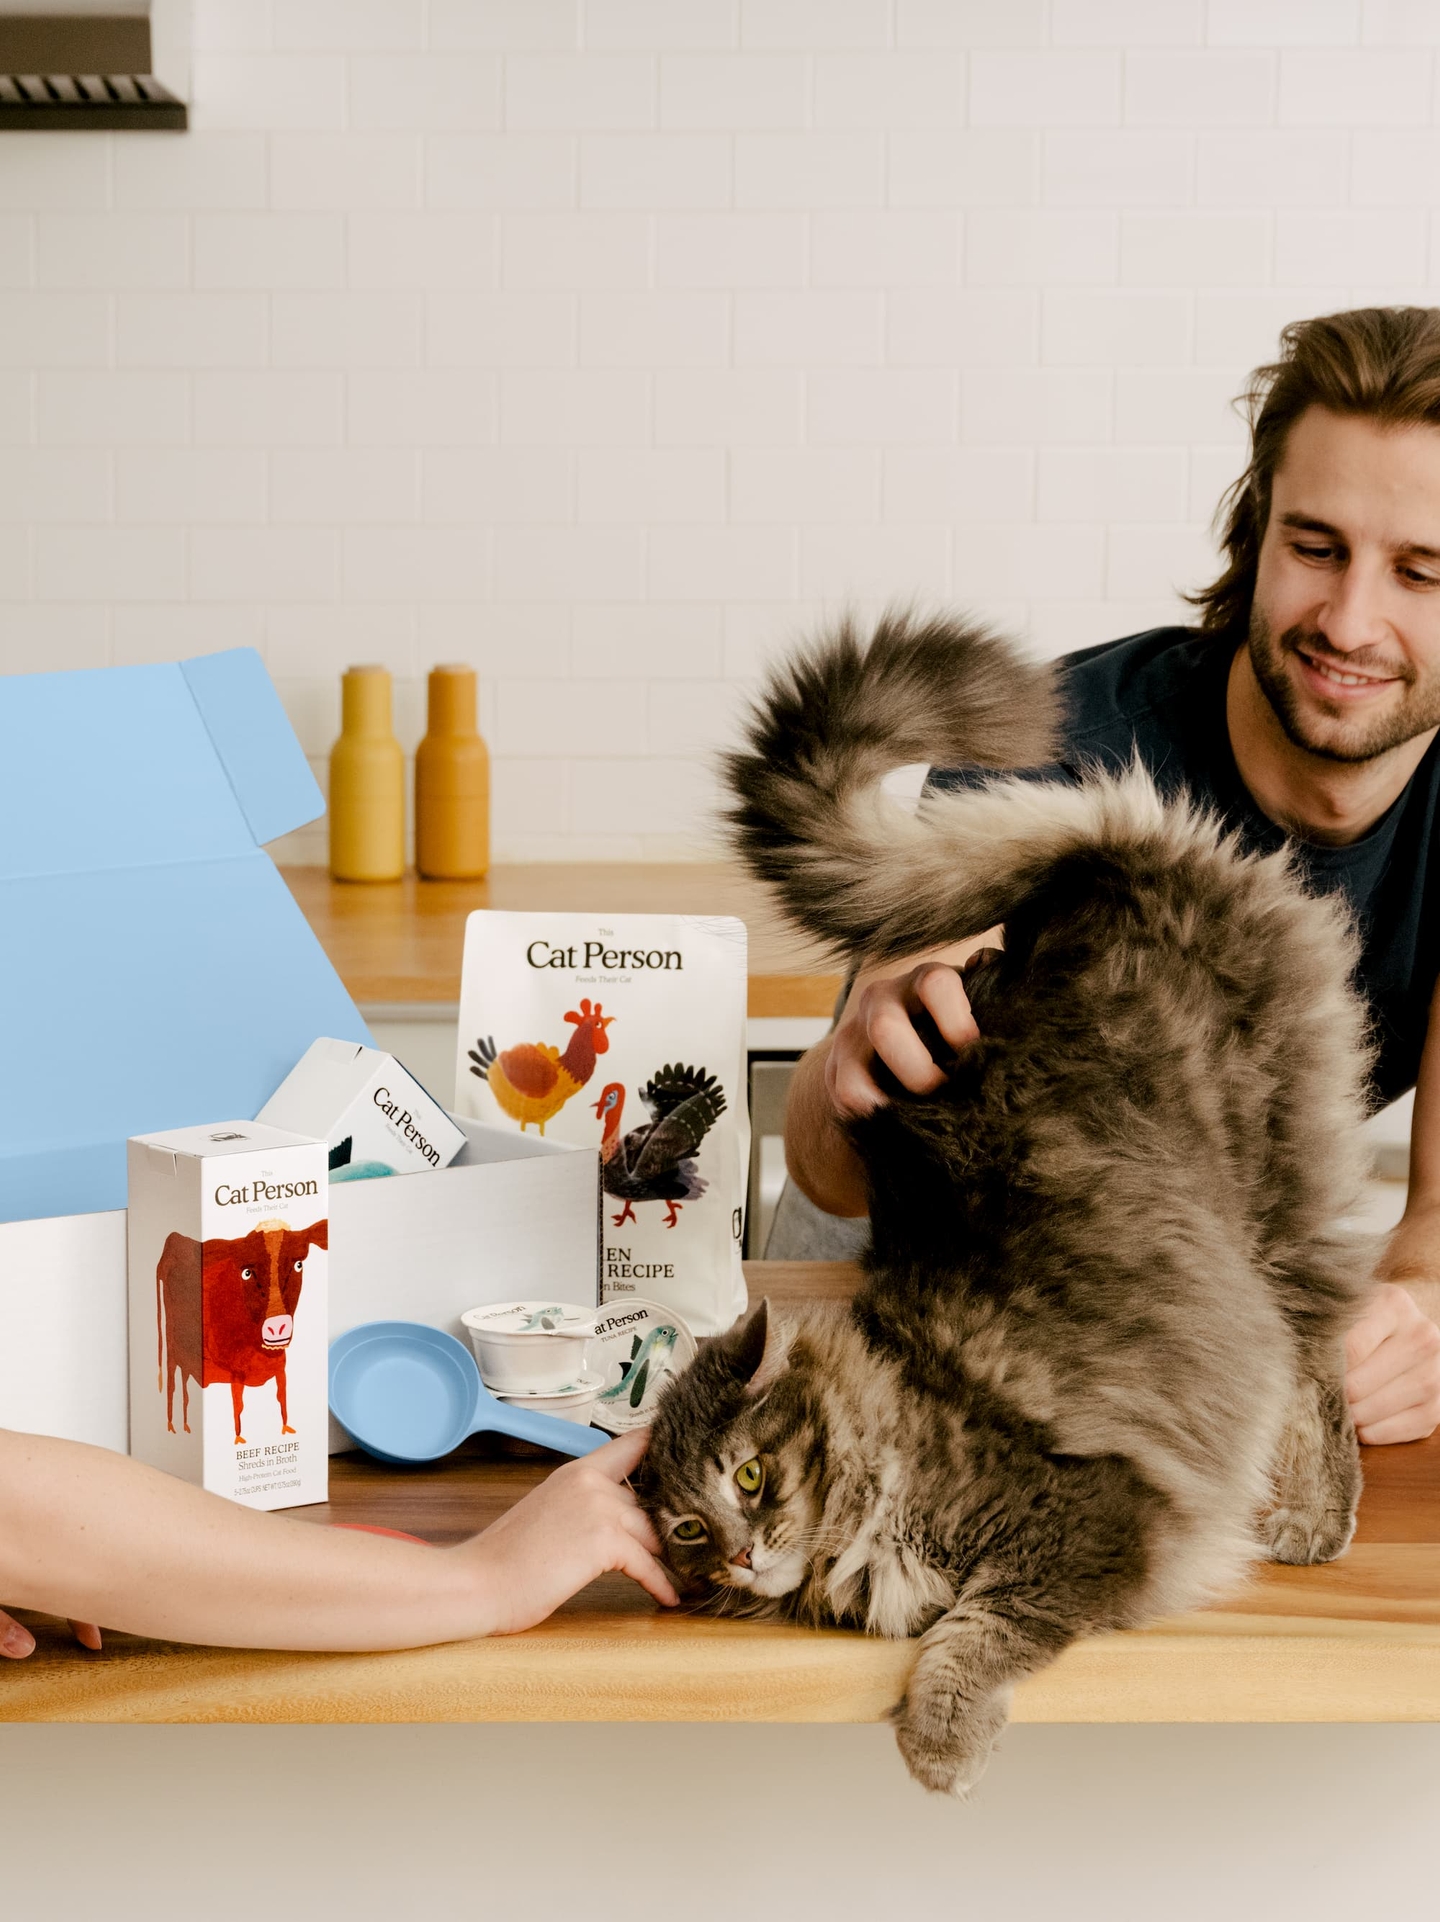 A man pets a happy cat. There is a Cat Person starter box in the background